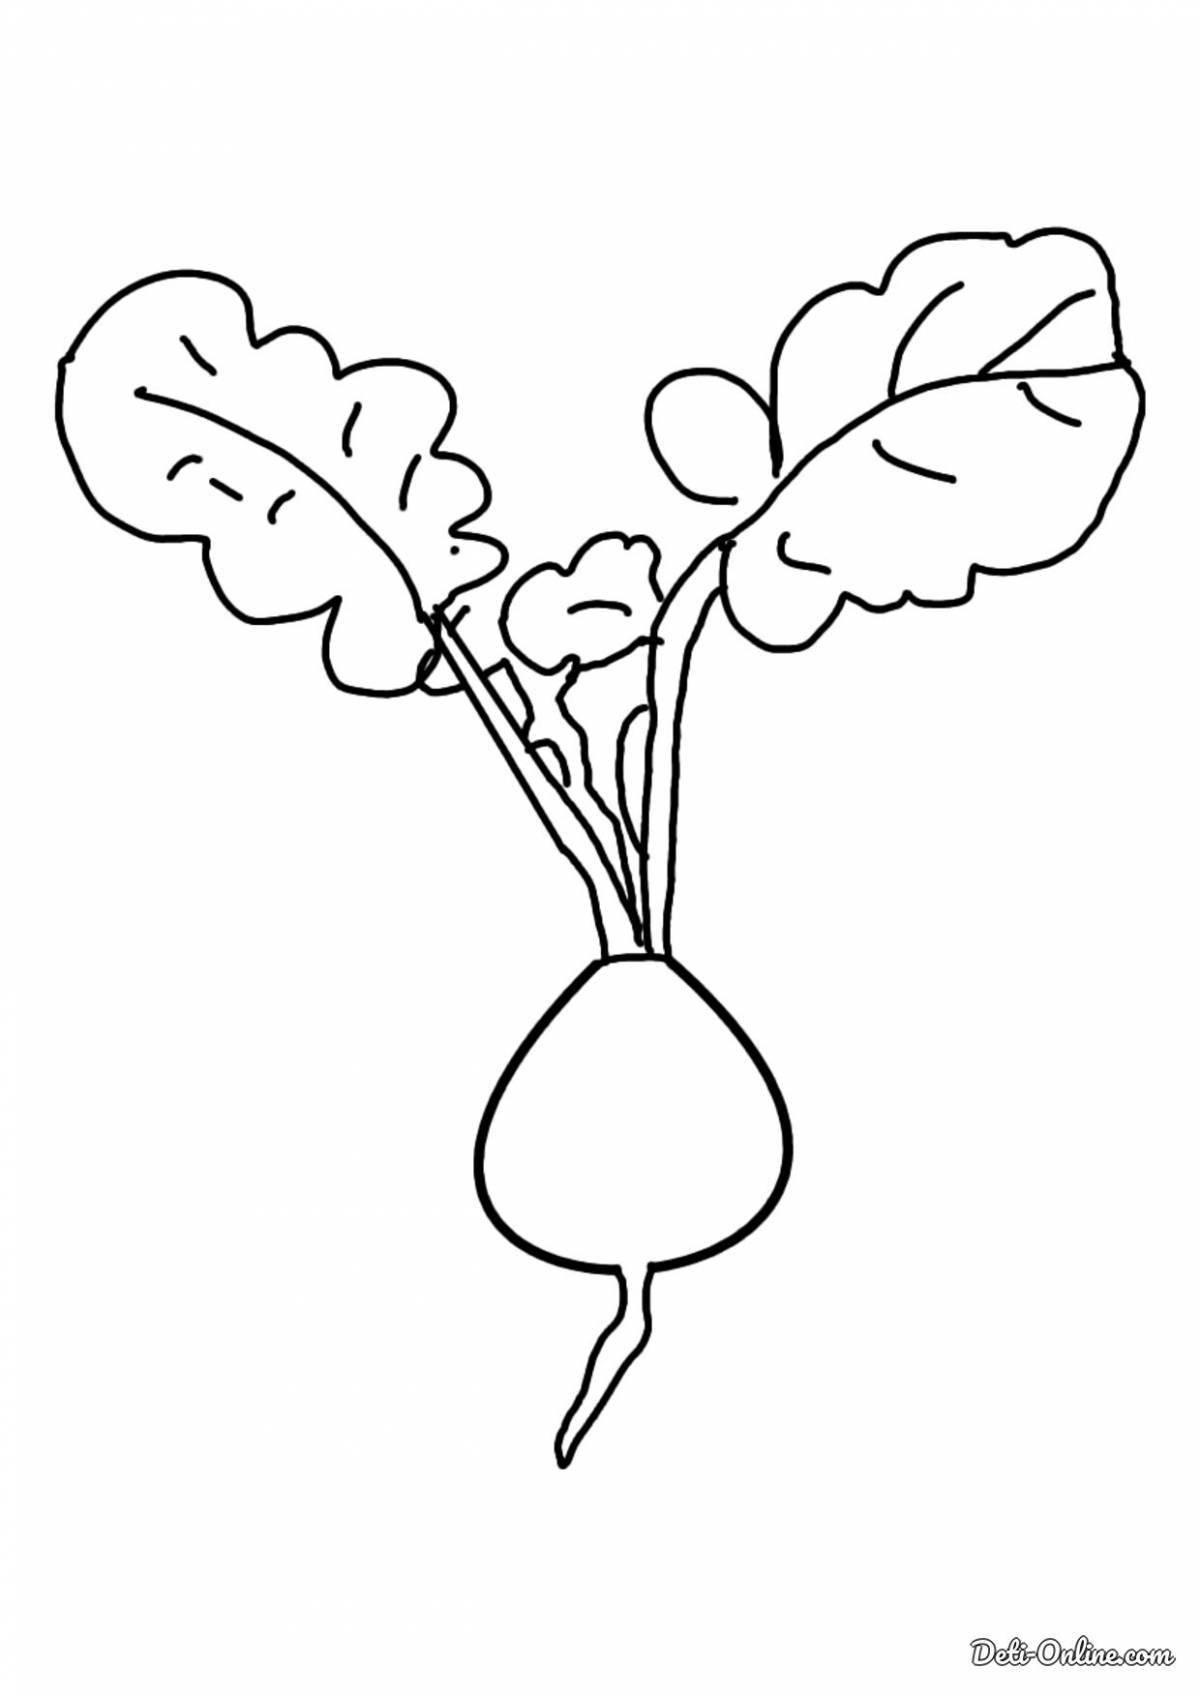 Clear radish coloring page